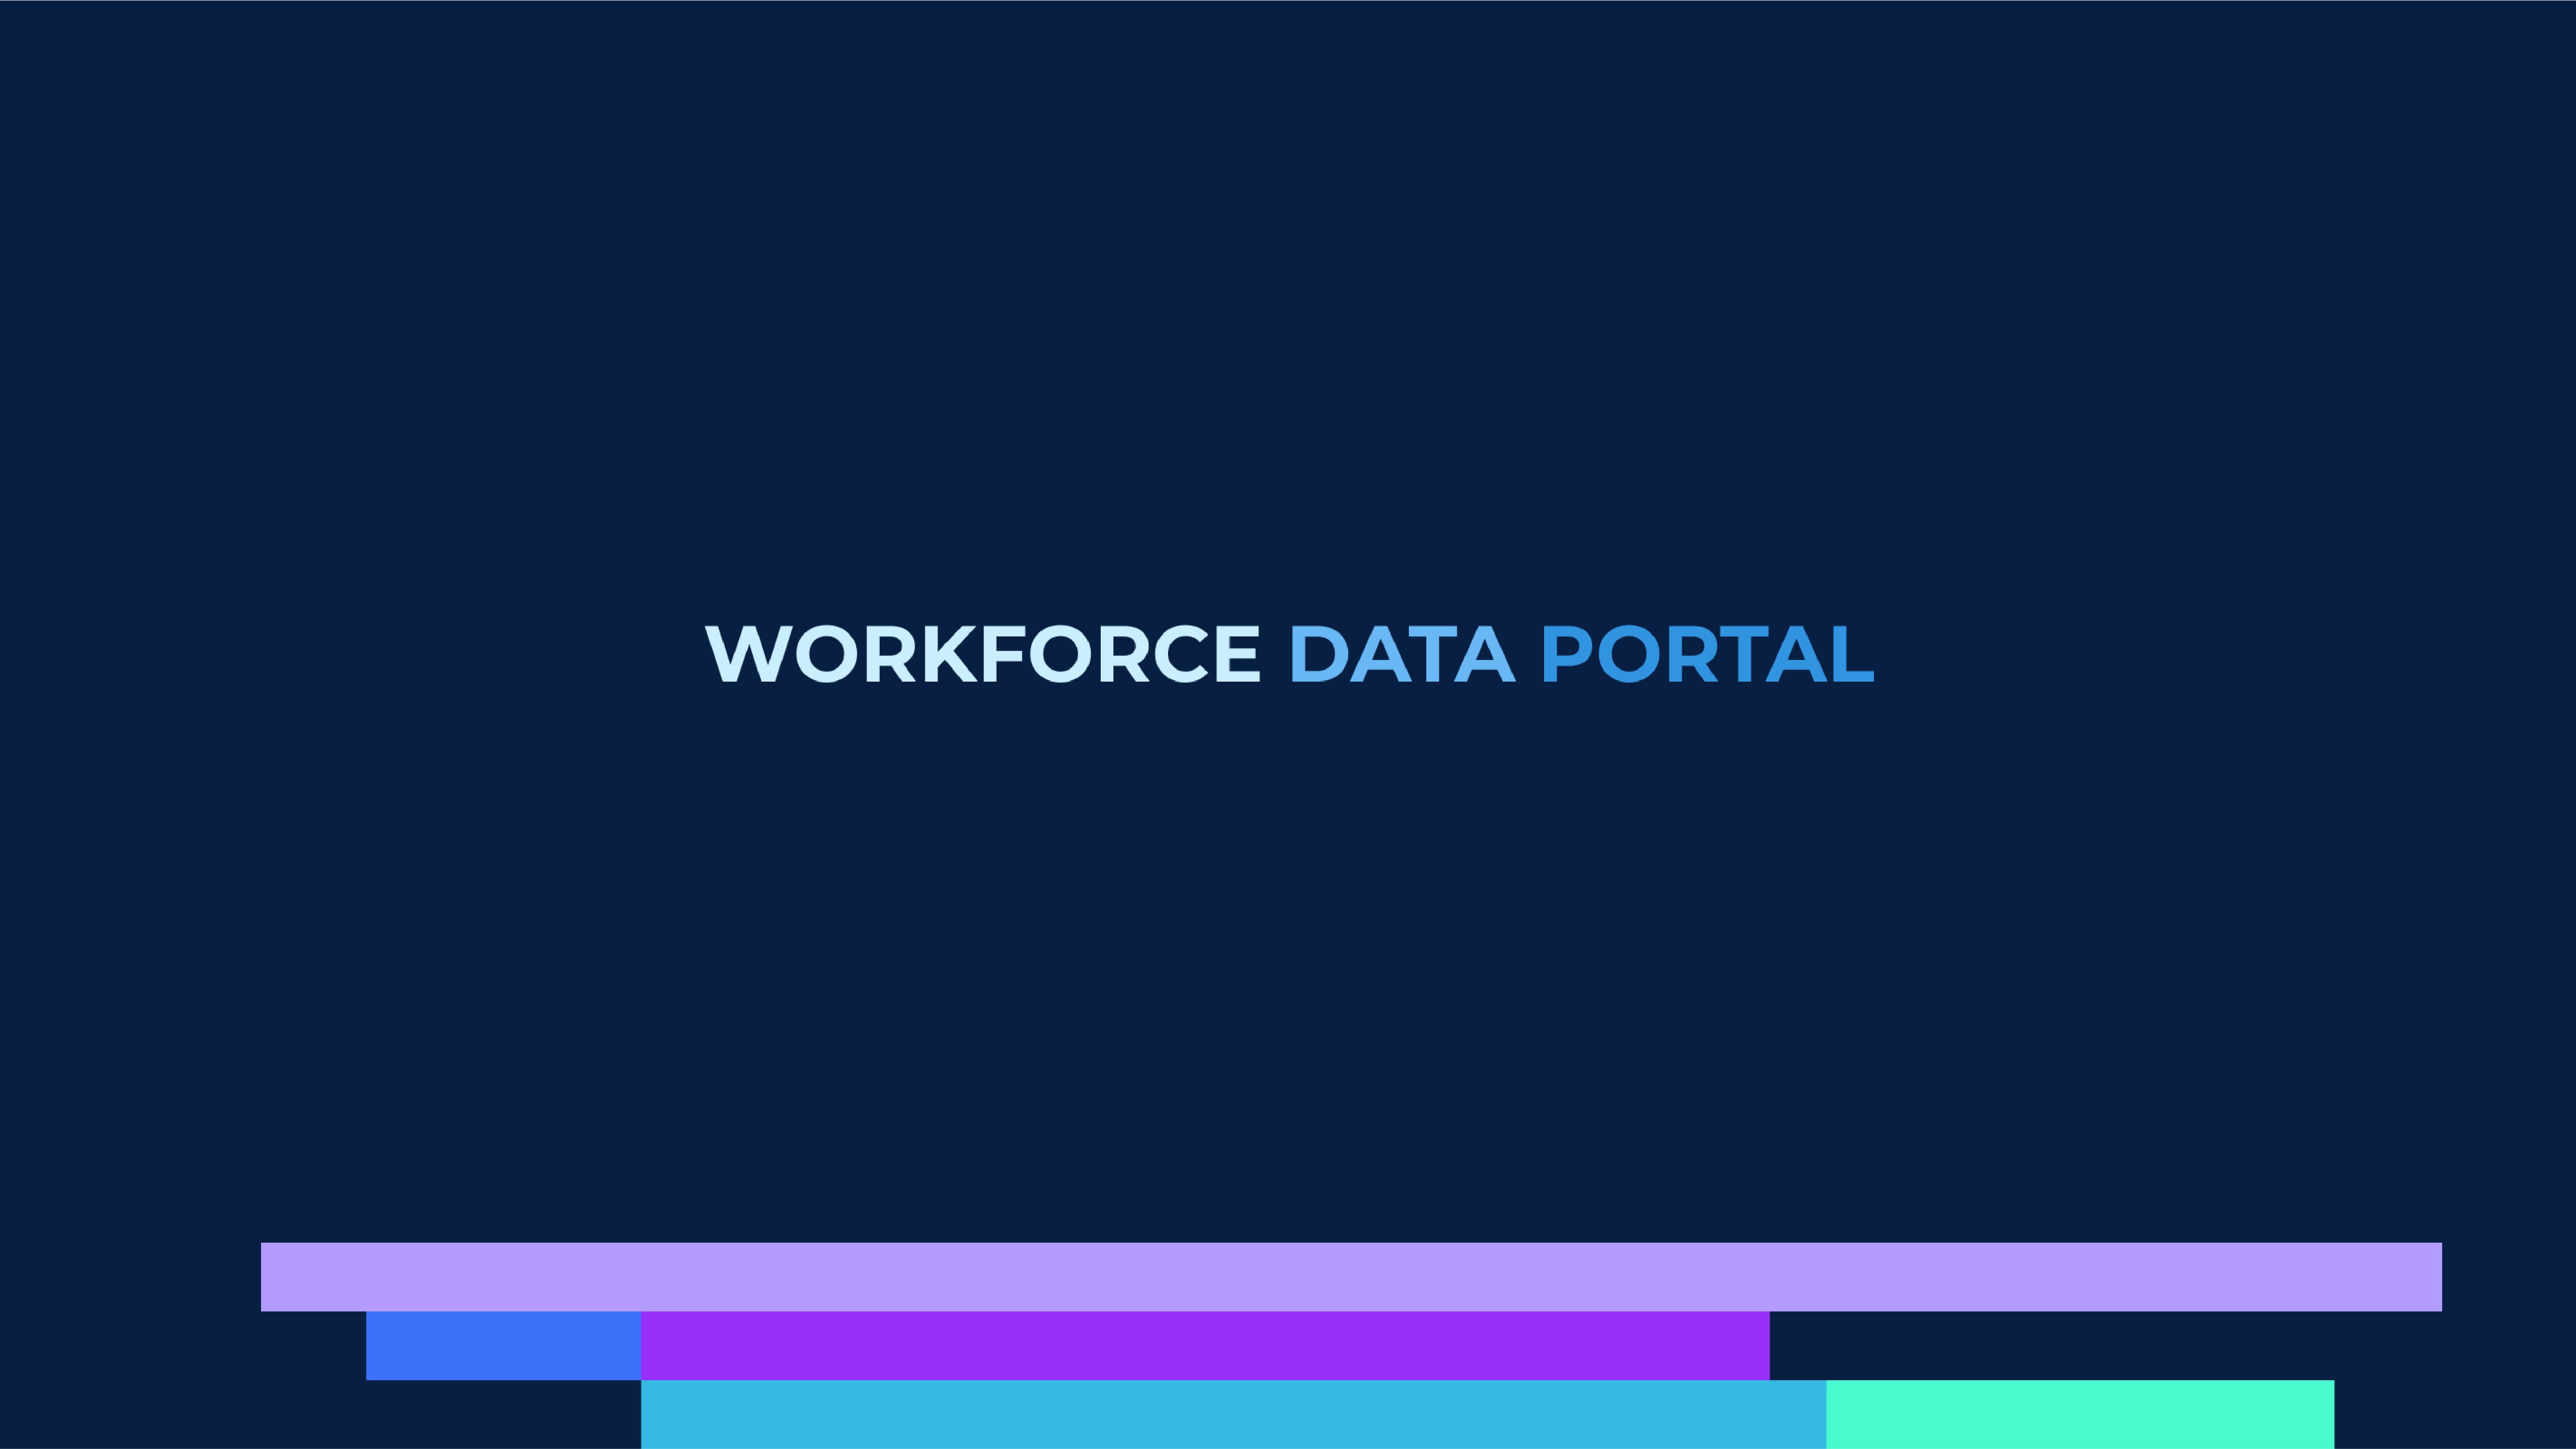 NYC Workforce Data Portal logo with horizontal bars of brand colors